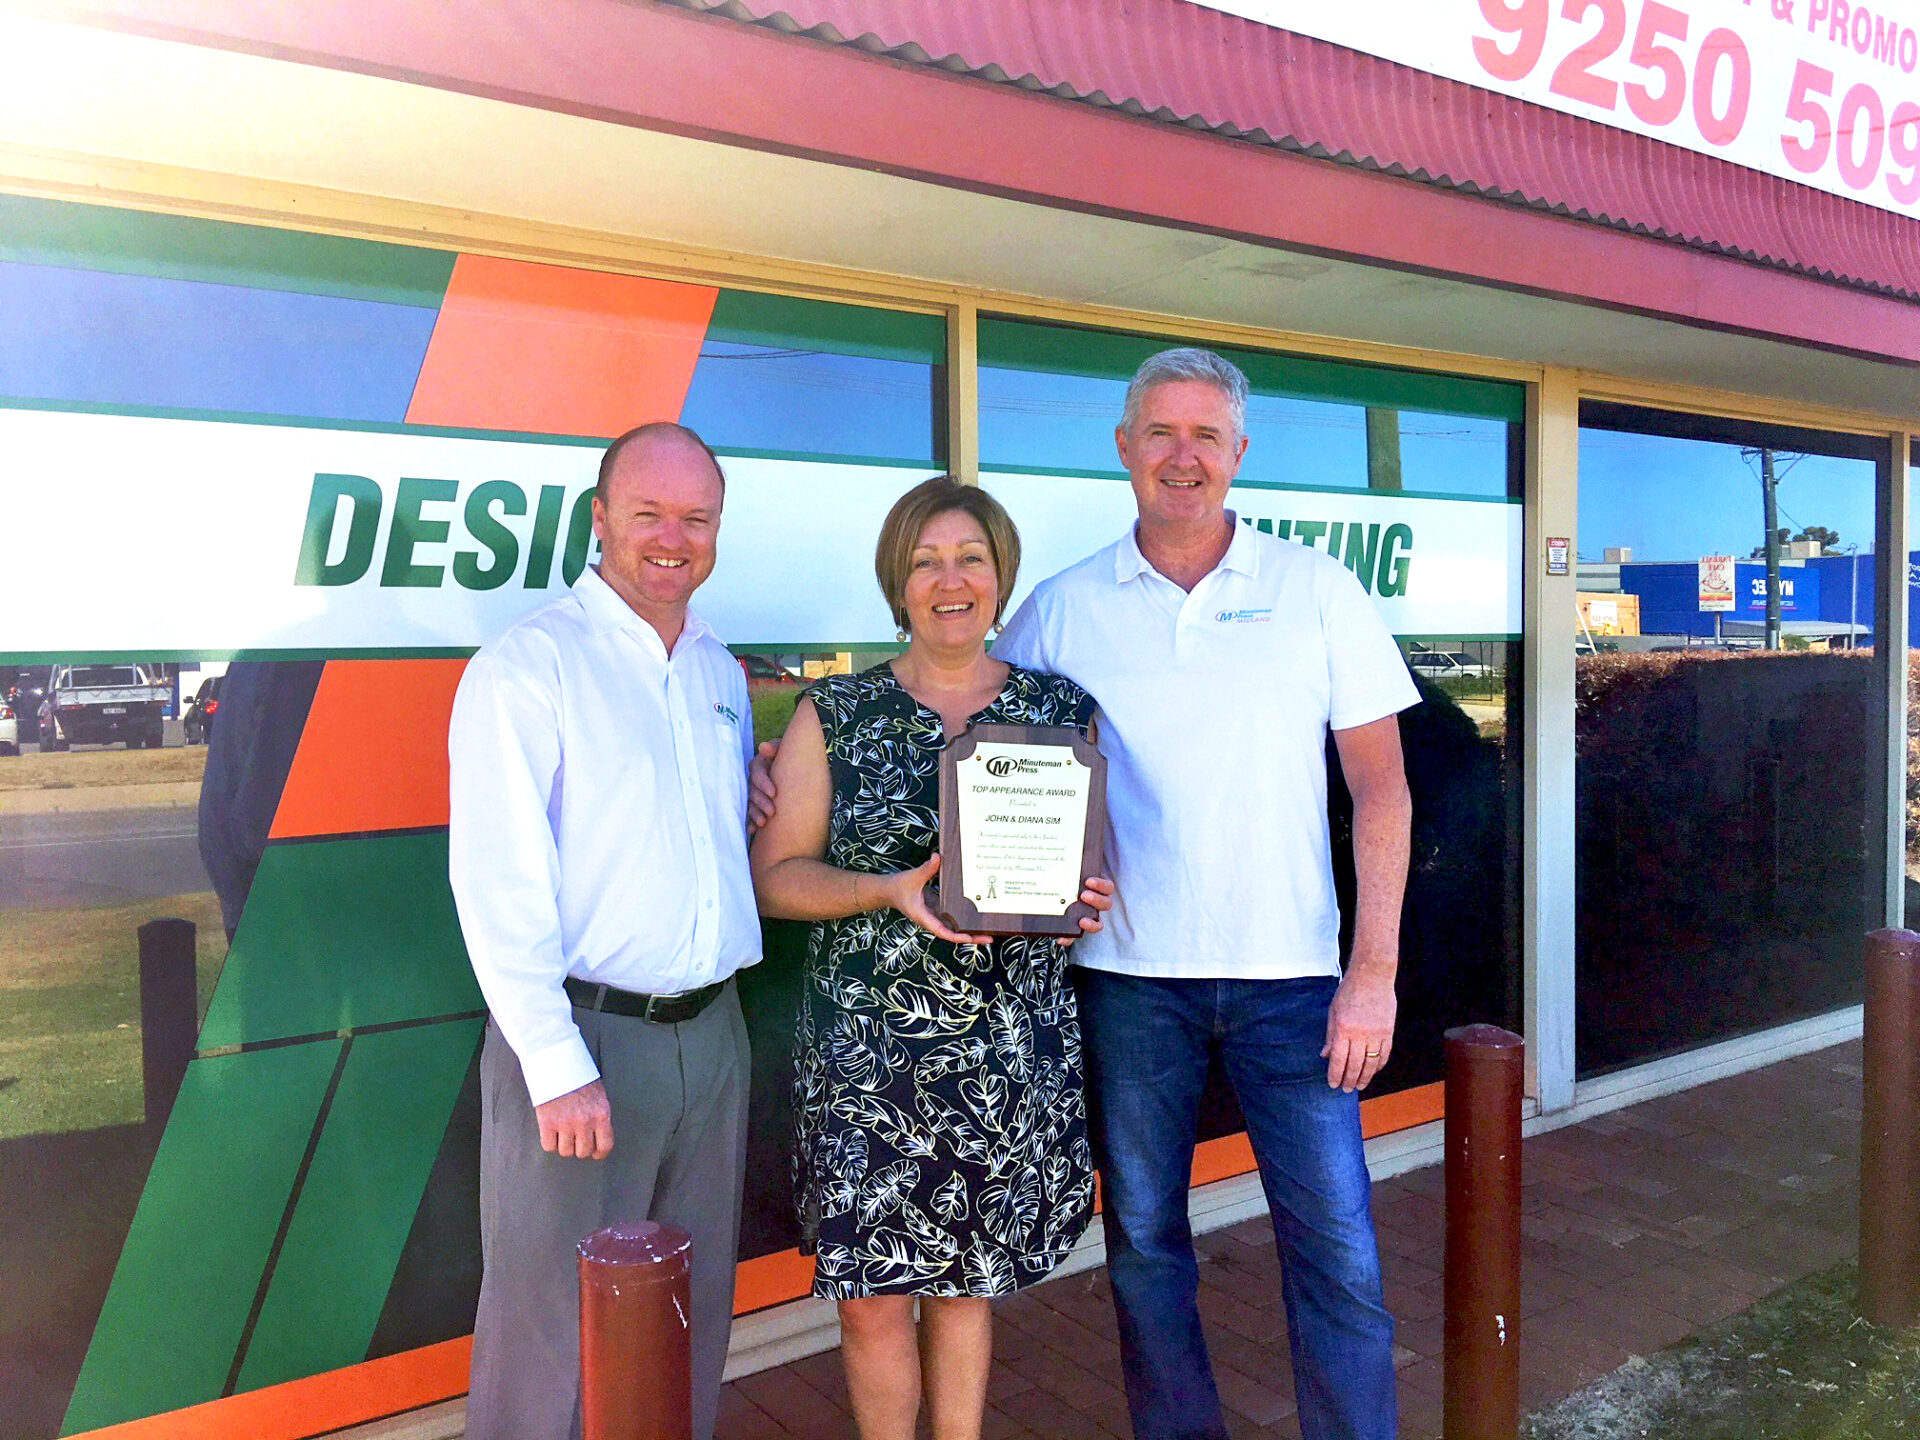 Minuteman Press Franchisees John and Diana Sim Celebrate Four Years in Business in Midland, Perth, Western Australia